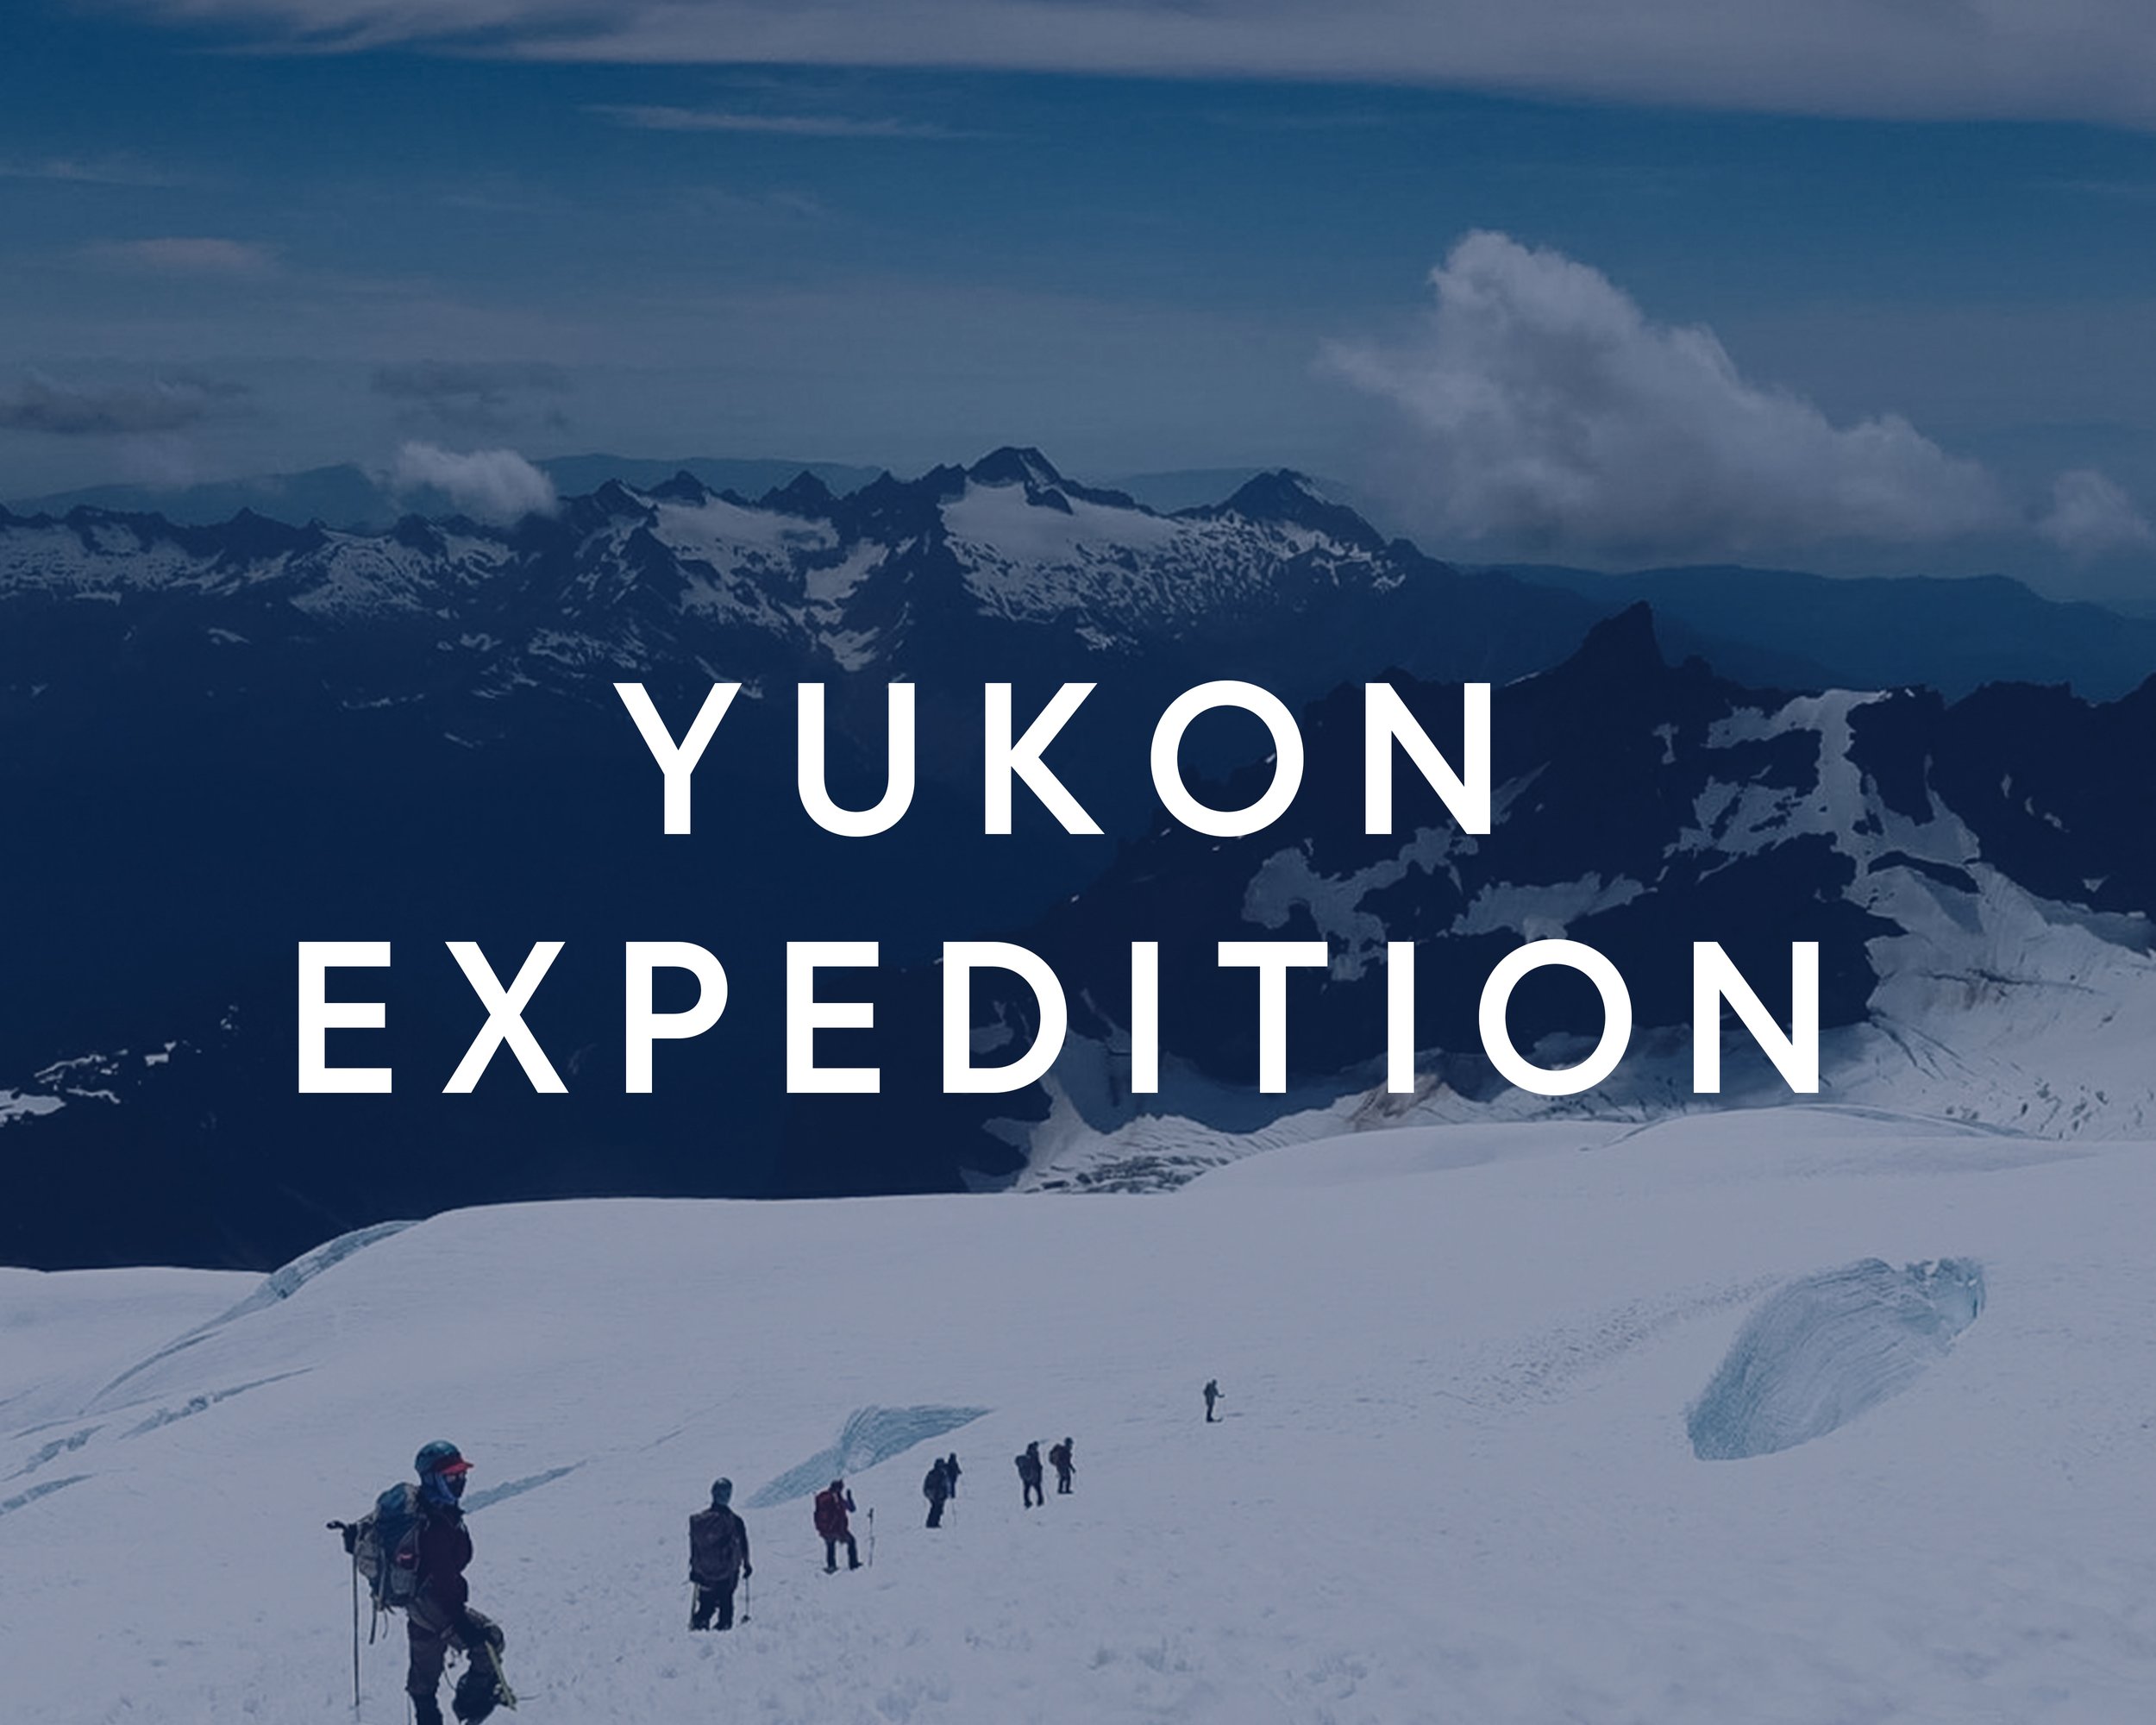 Image links to the yukon expedition information page